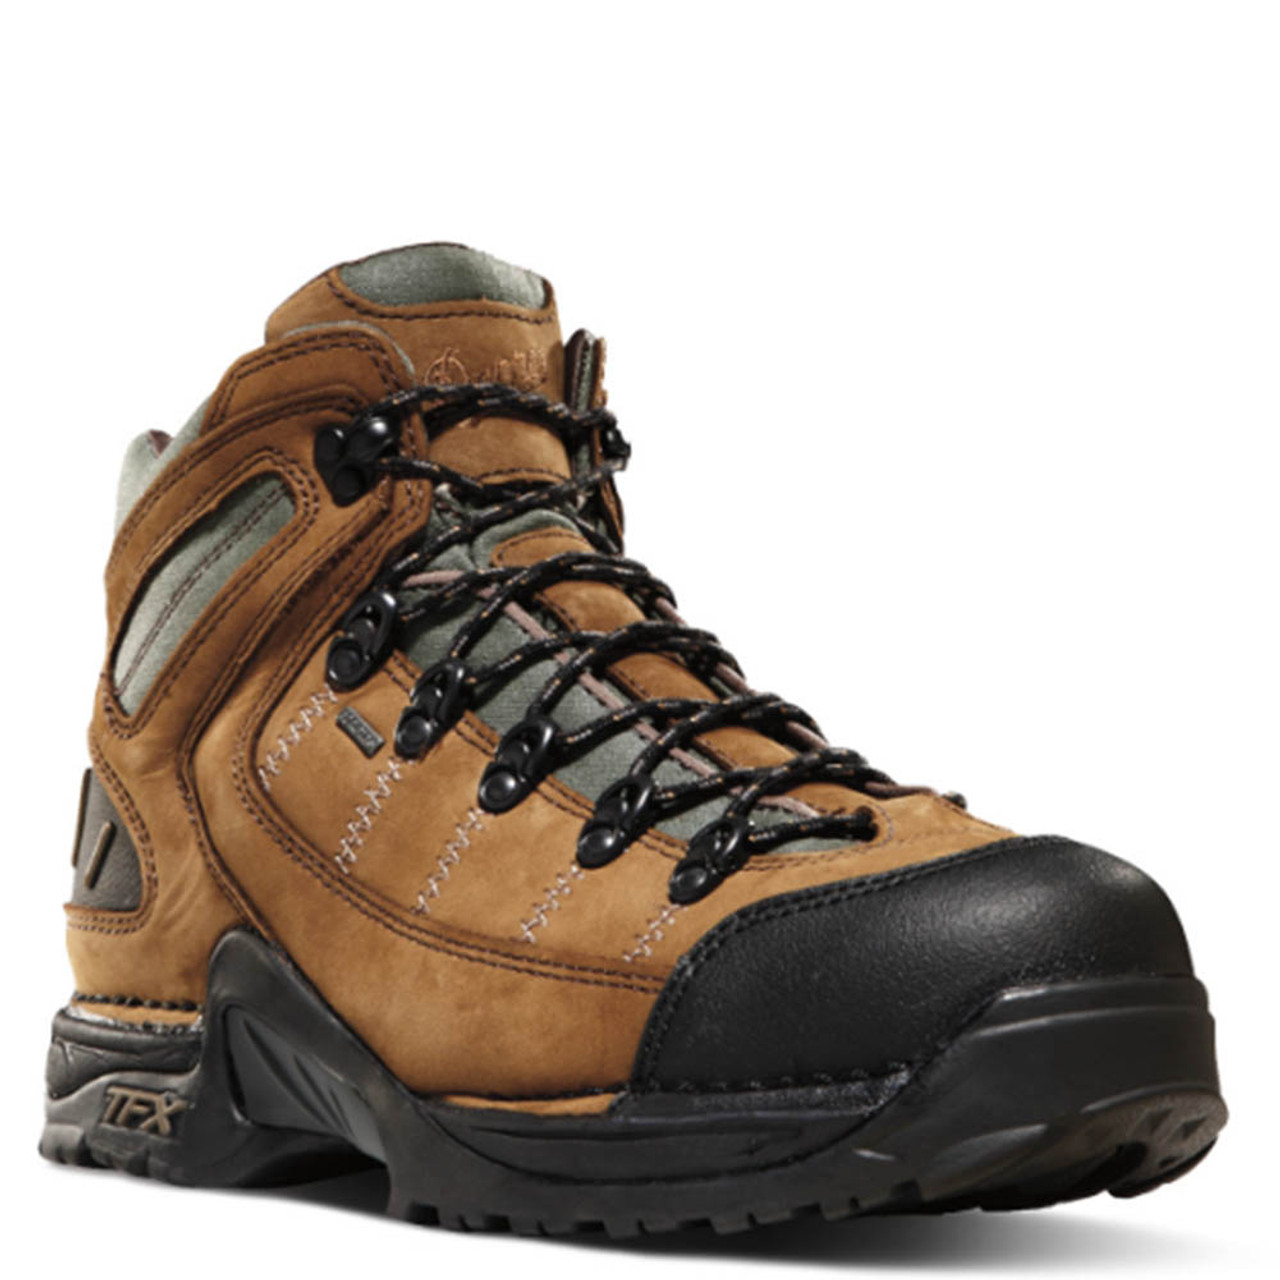 Danner Hiking Boots #45364 Gore-Tex Backpacking Boots - Family Footwear ...